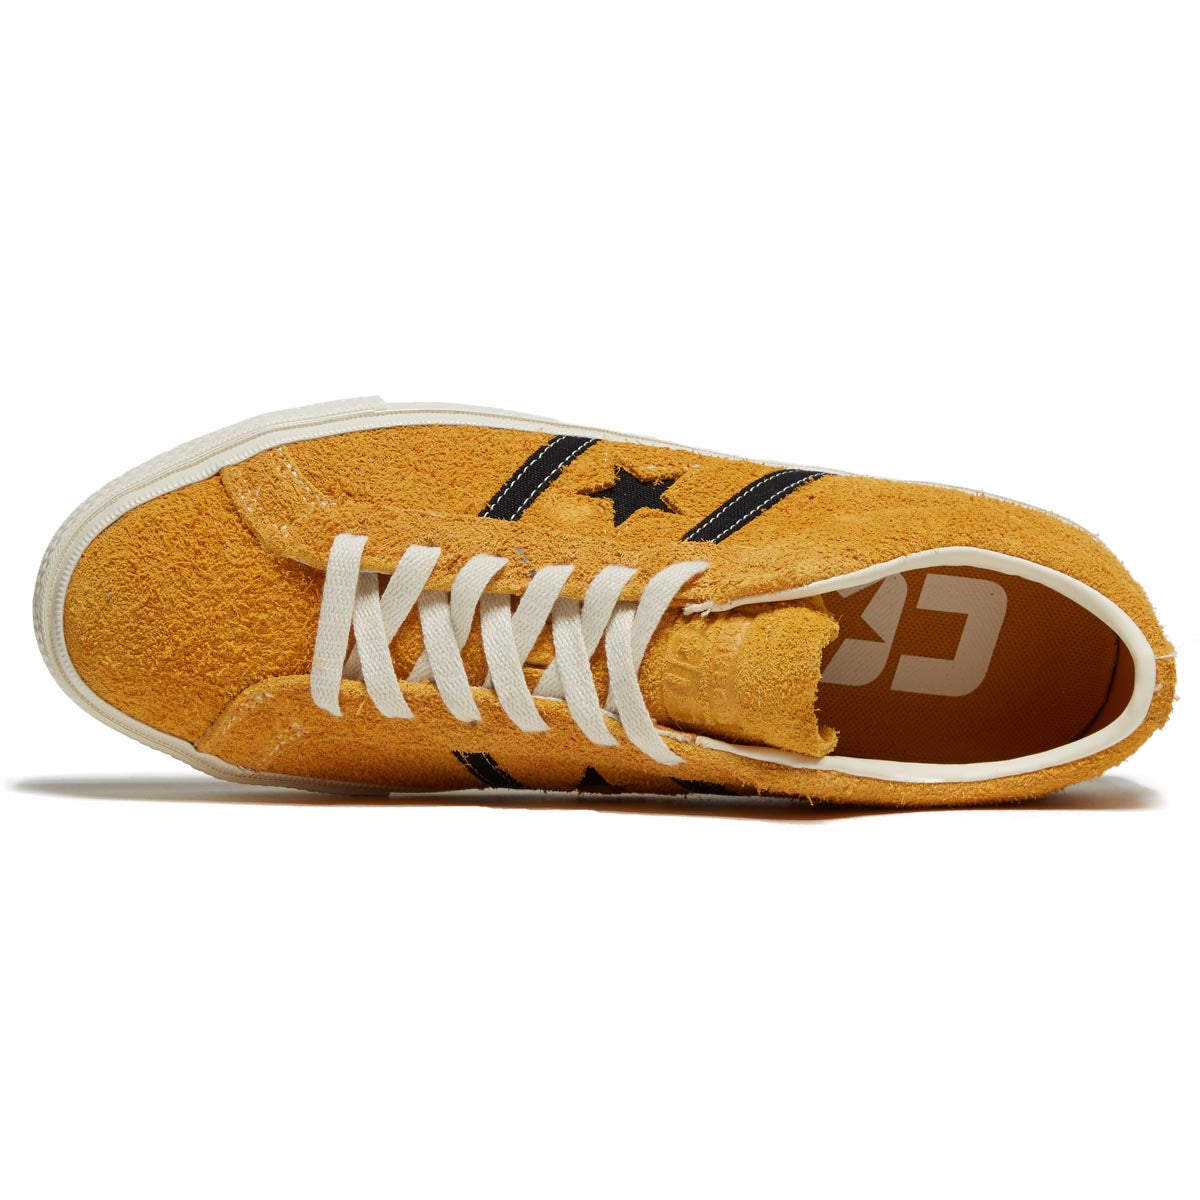 Converse One Star Academy Pro Suede Ox Shoes - Sunflower Gold/Black/Egret image 3